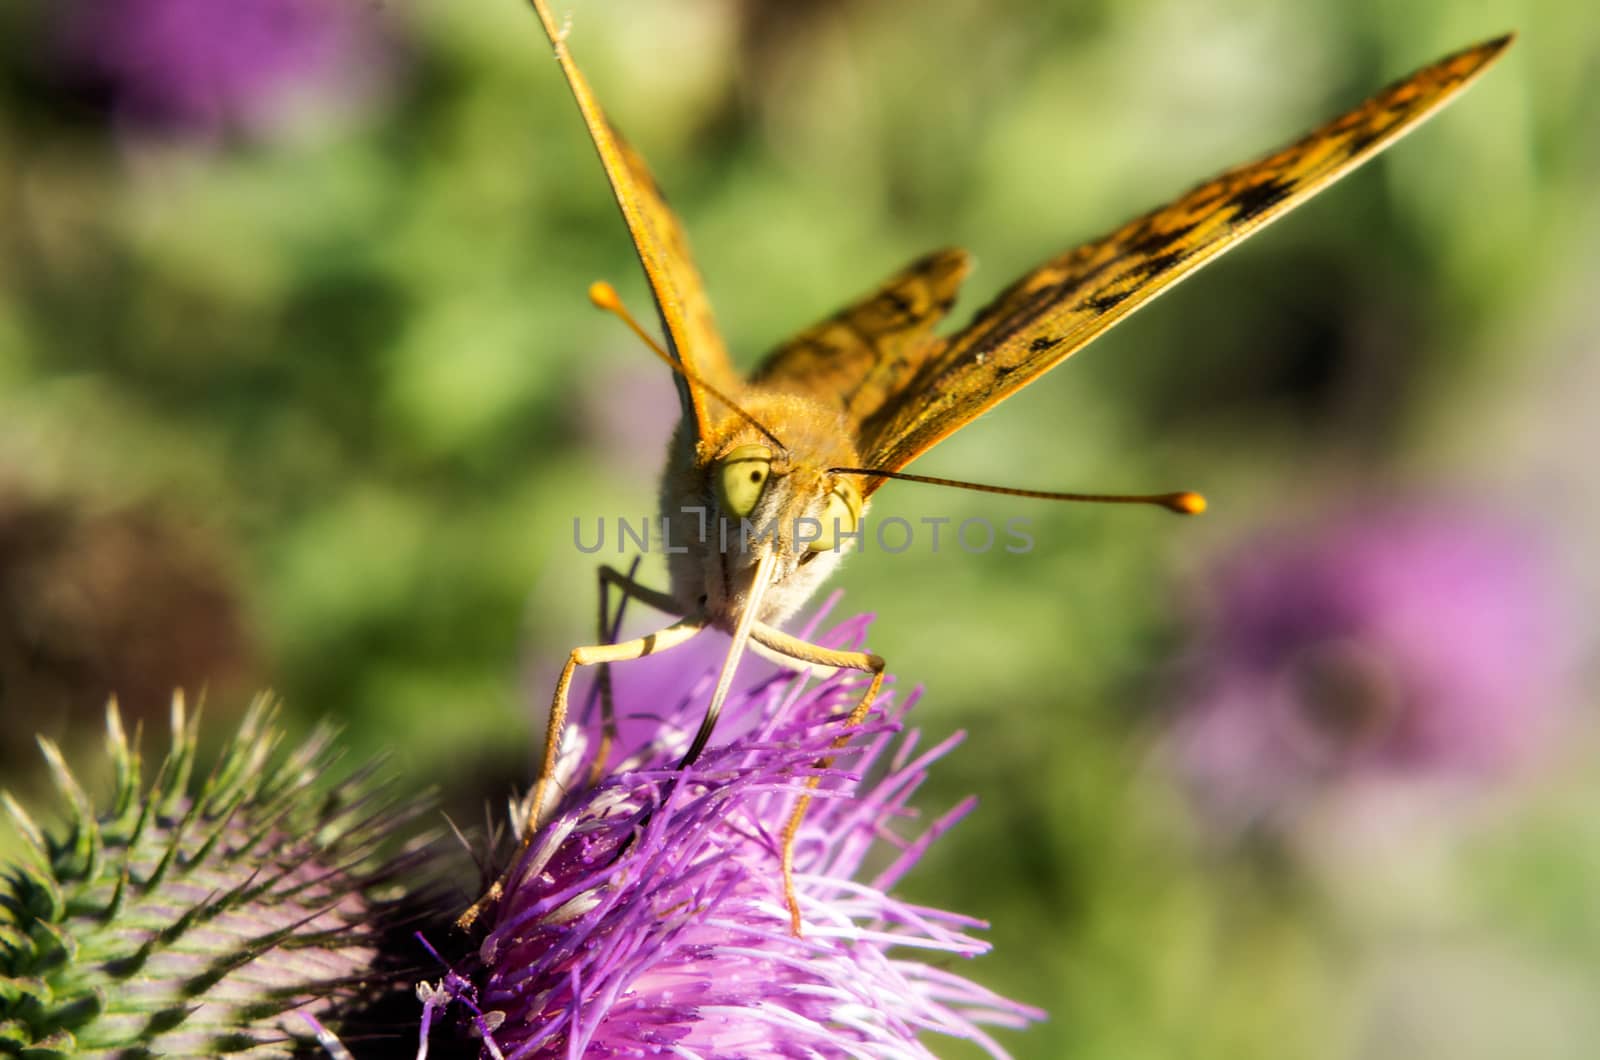 Close-up photo of a butterfly on summer flowers